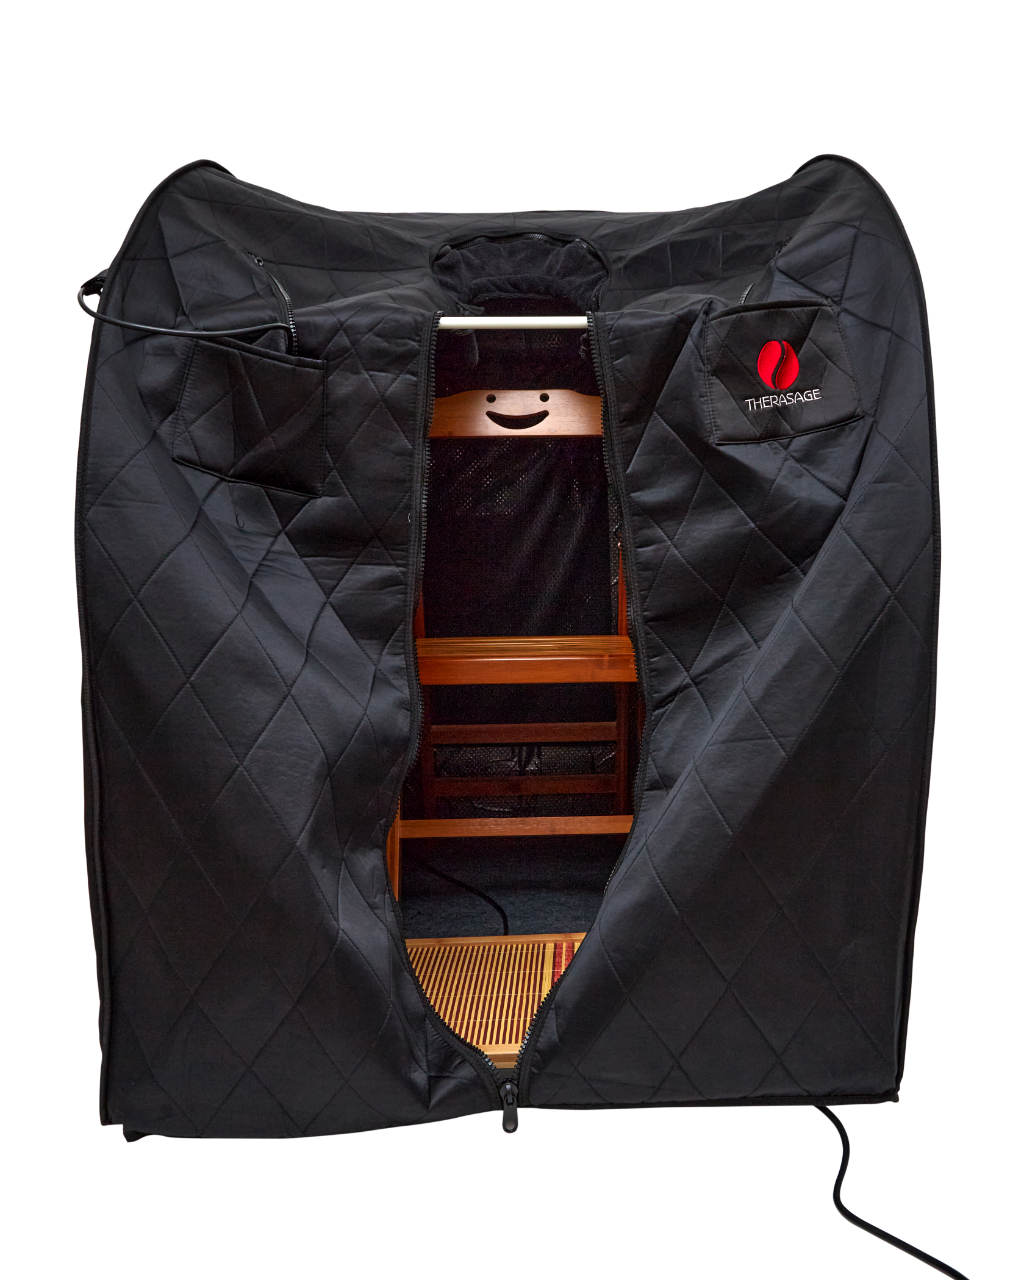 Therasage Perfectly Imperfect Thera360 PLUS Personal  Sauna (Black)